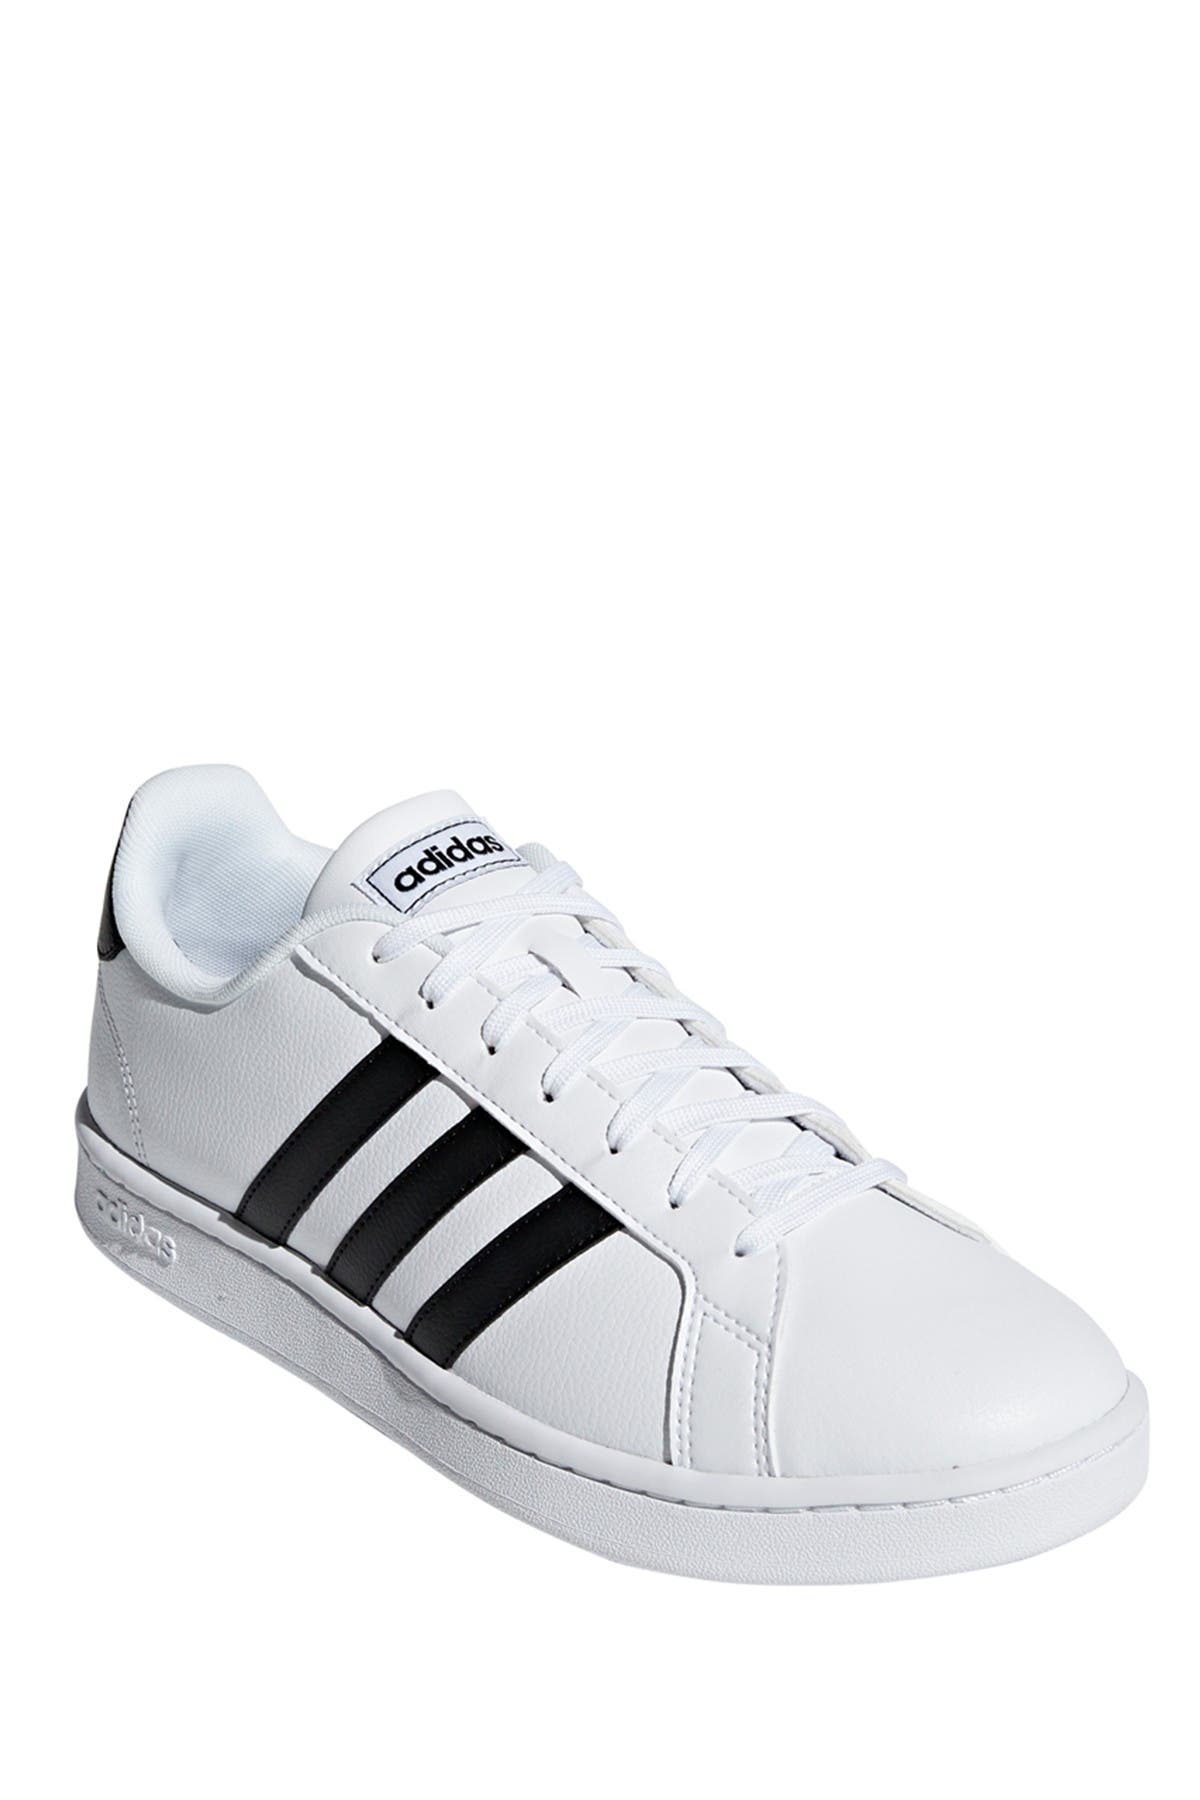 adidas black leather sneakers